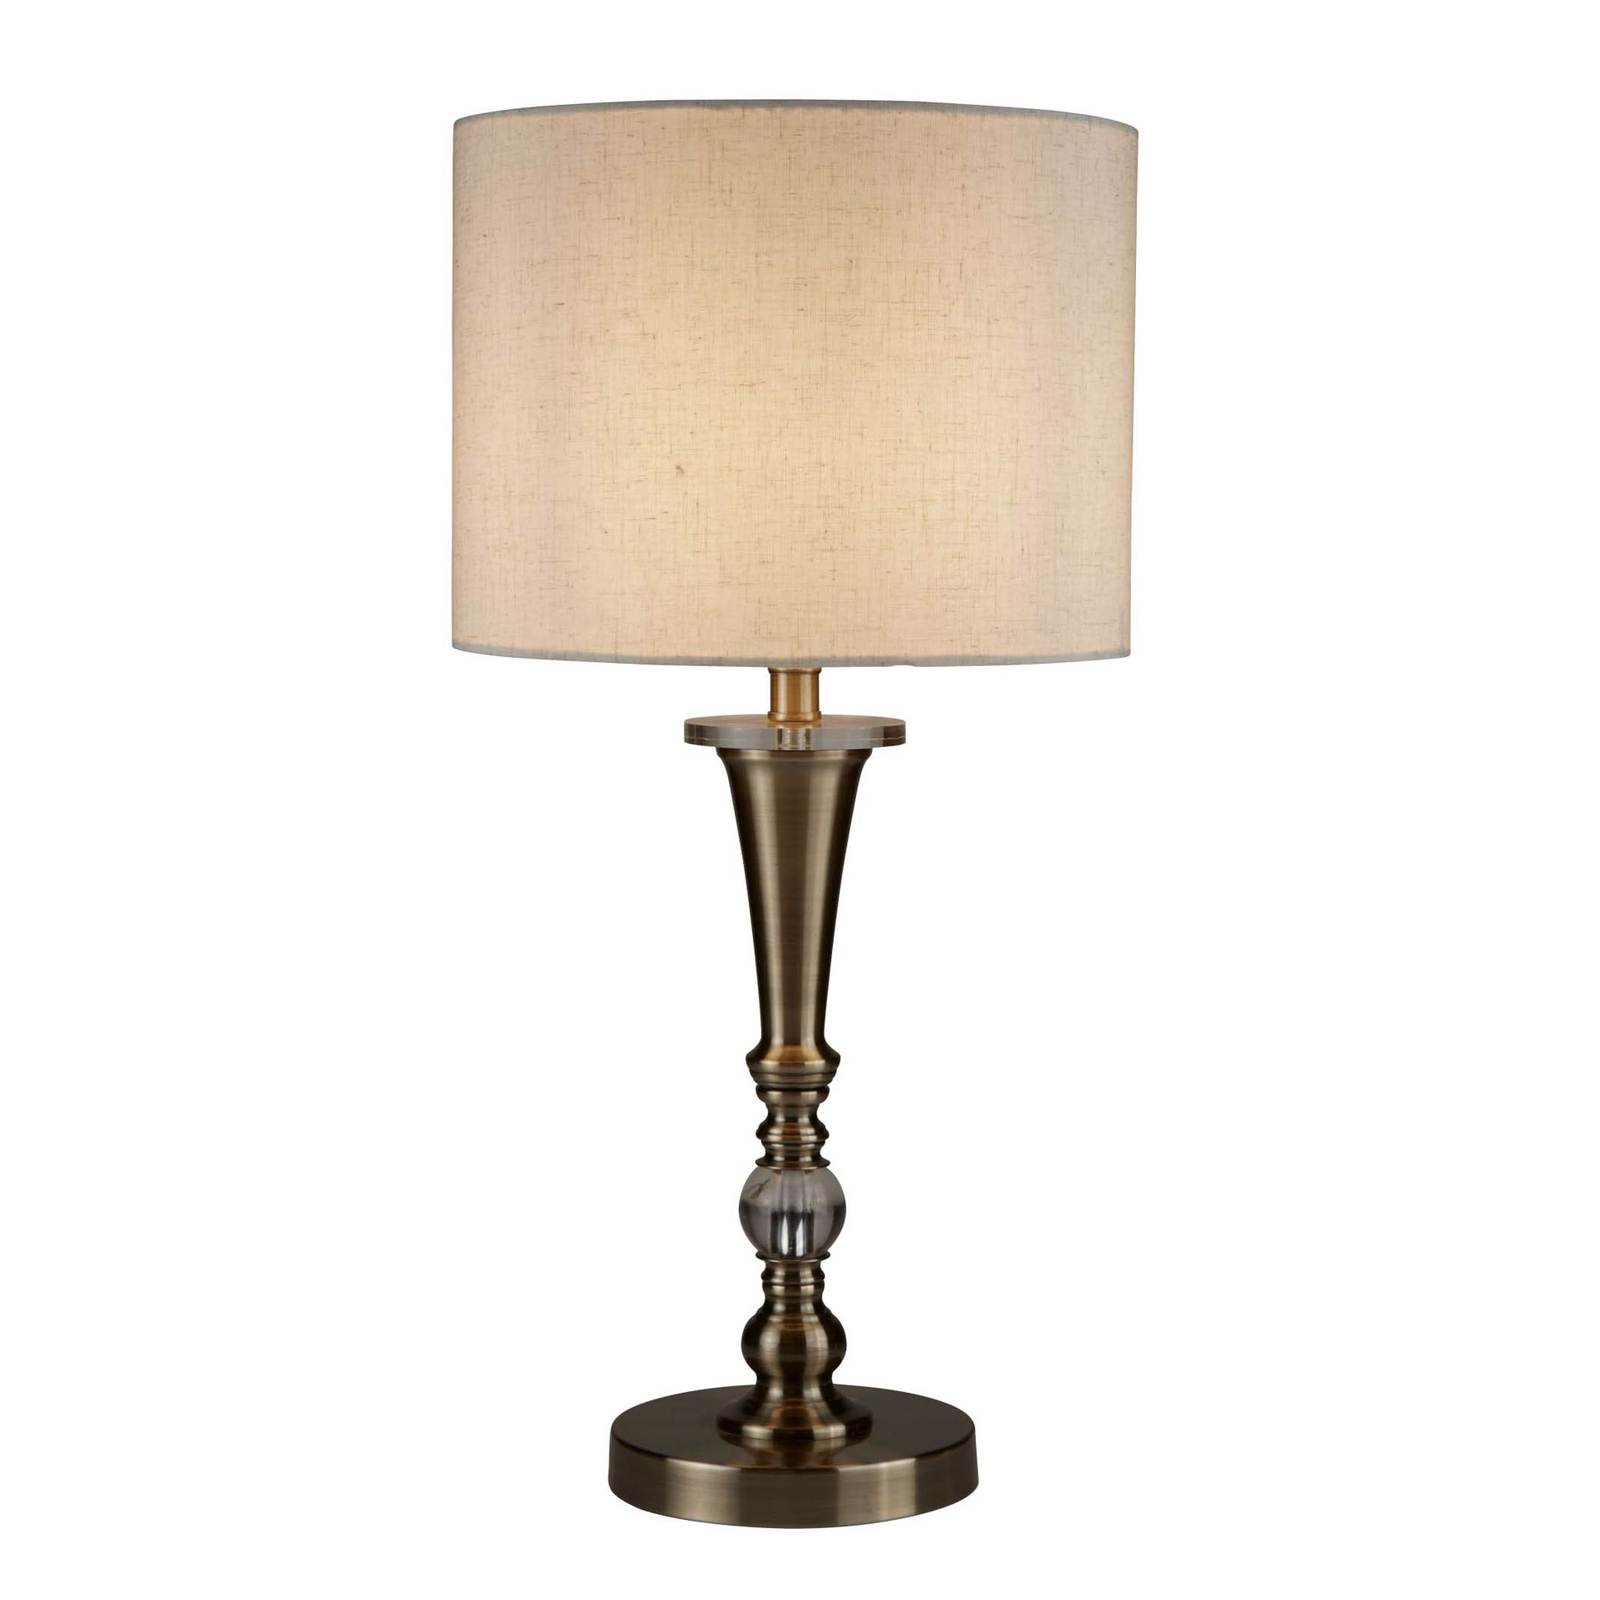 Oscar table lamp with a lampshade in a linen look